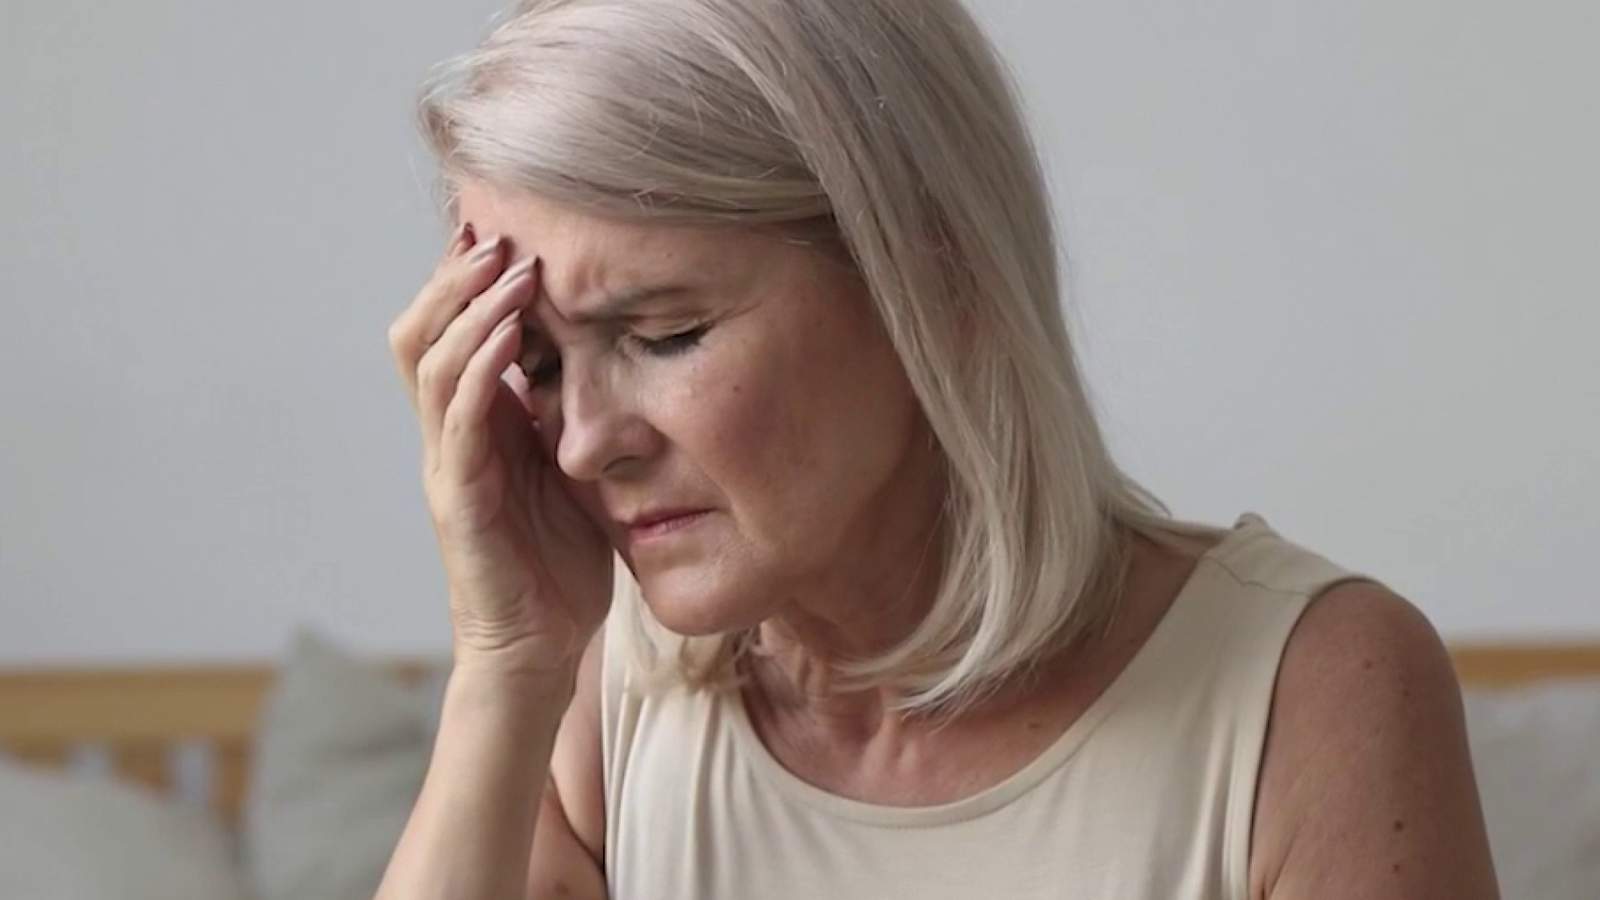 Dealing with dizziness? Here’s what you should do